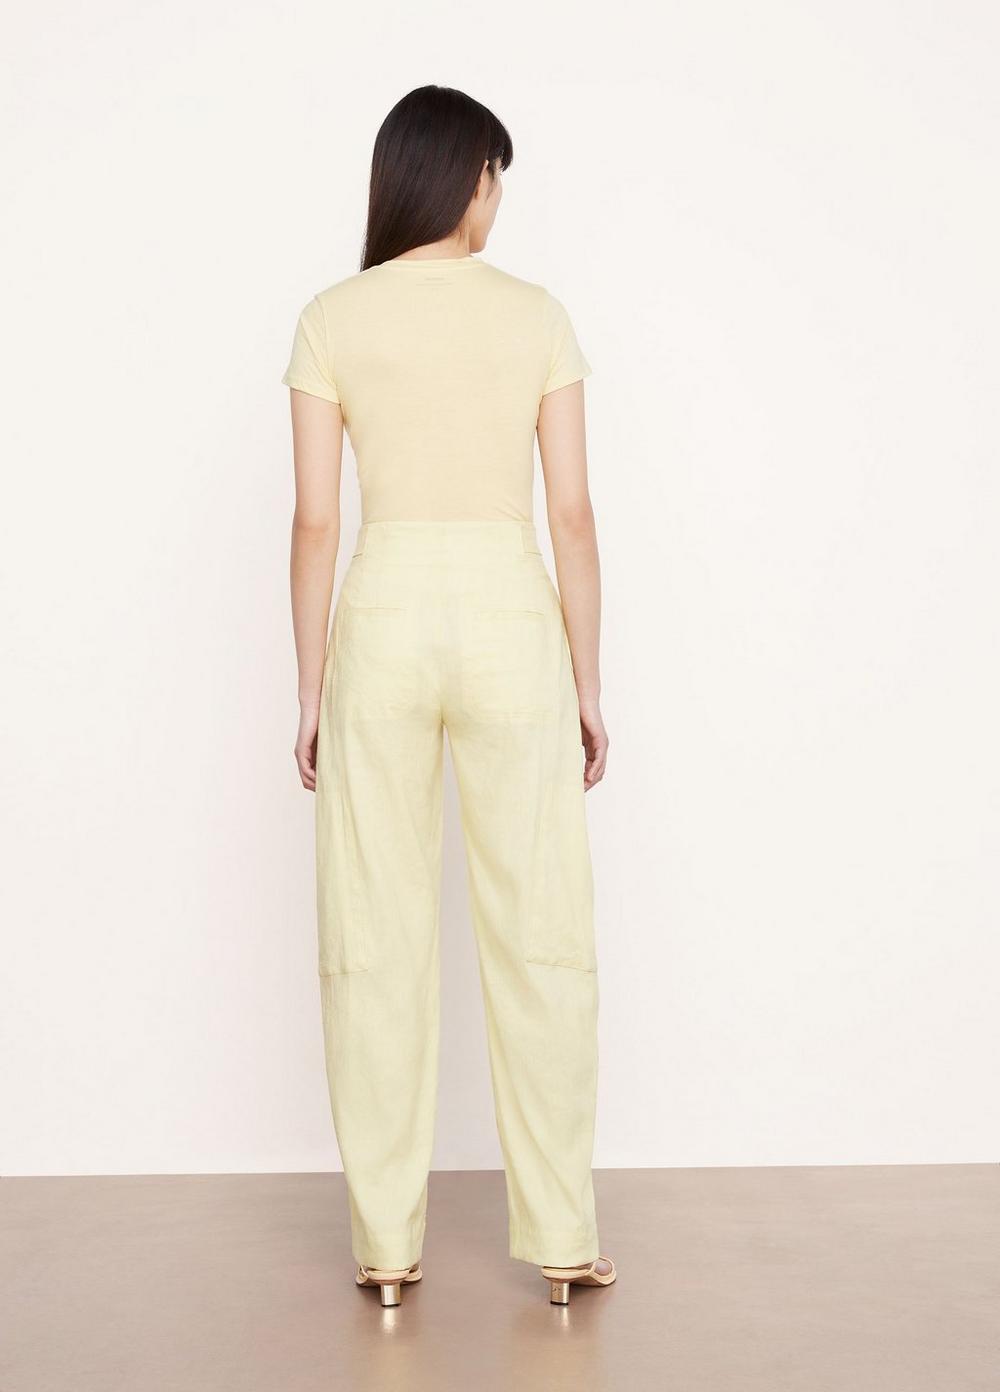 Vince | Tailored Utility Pant in Pomelo | Vince Unfold